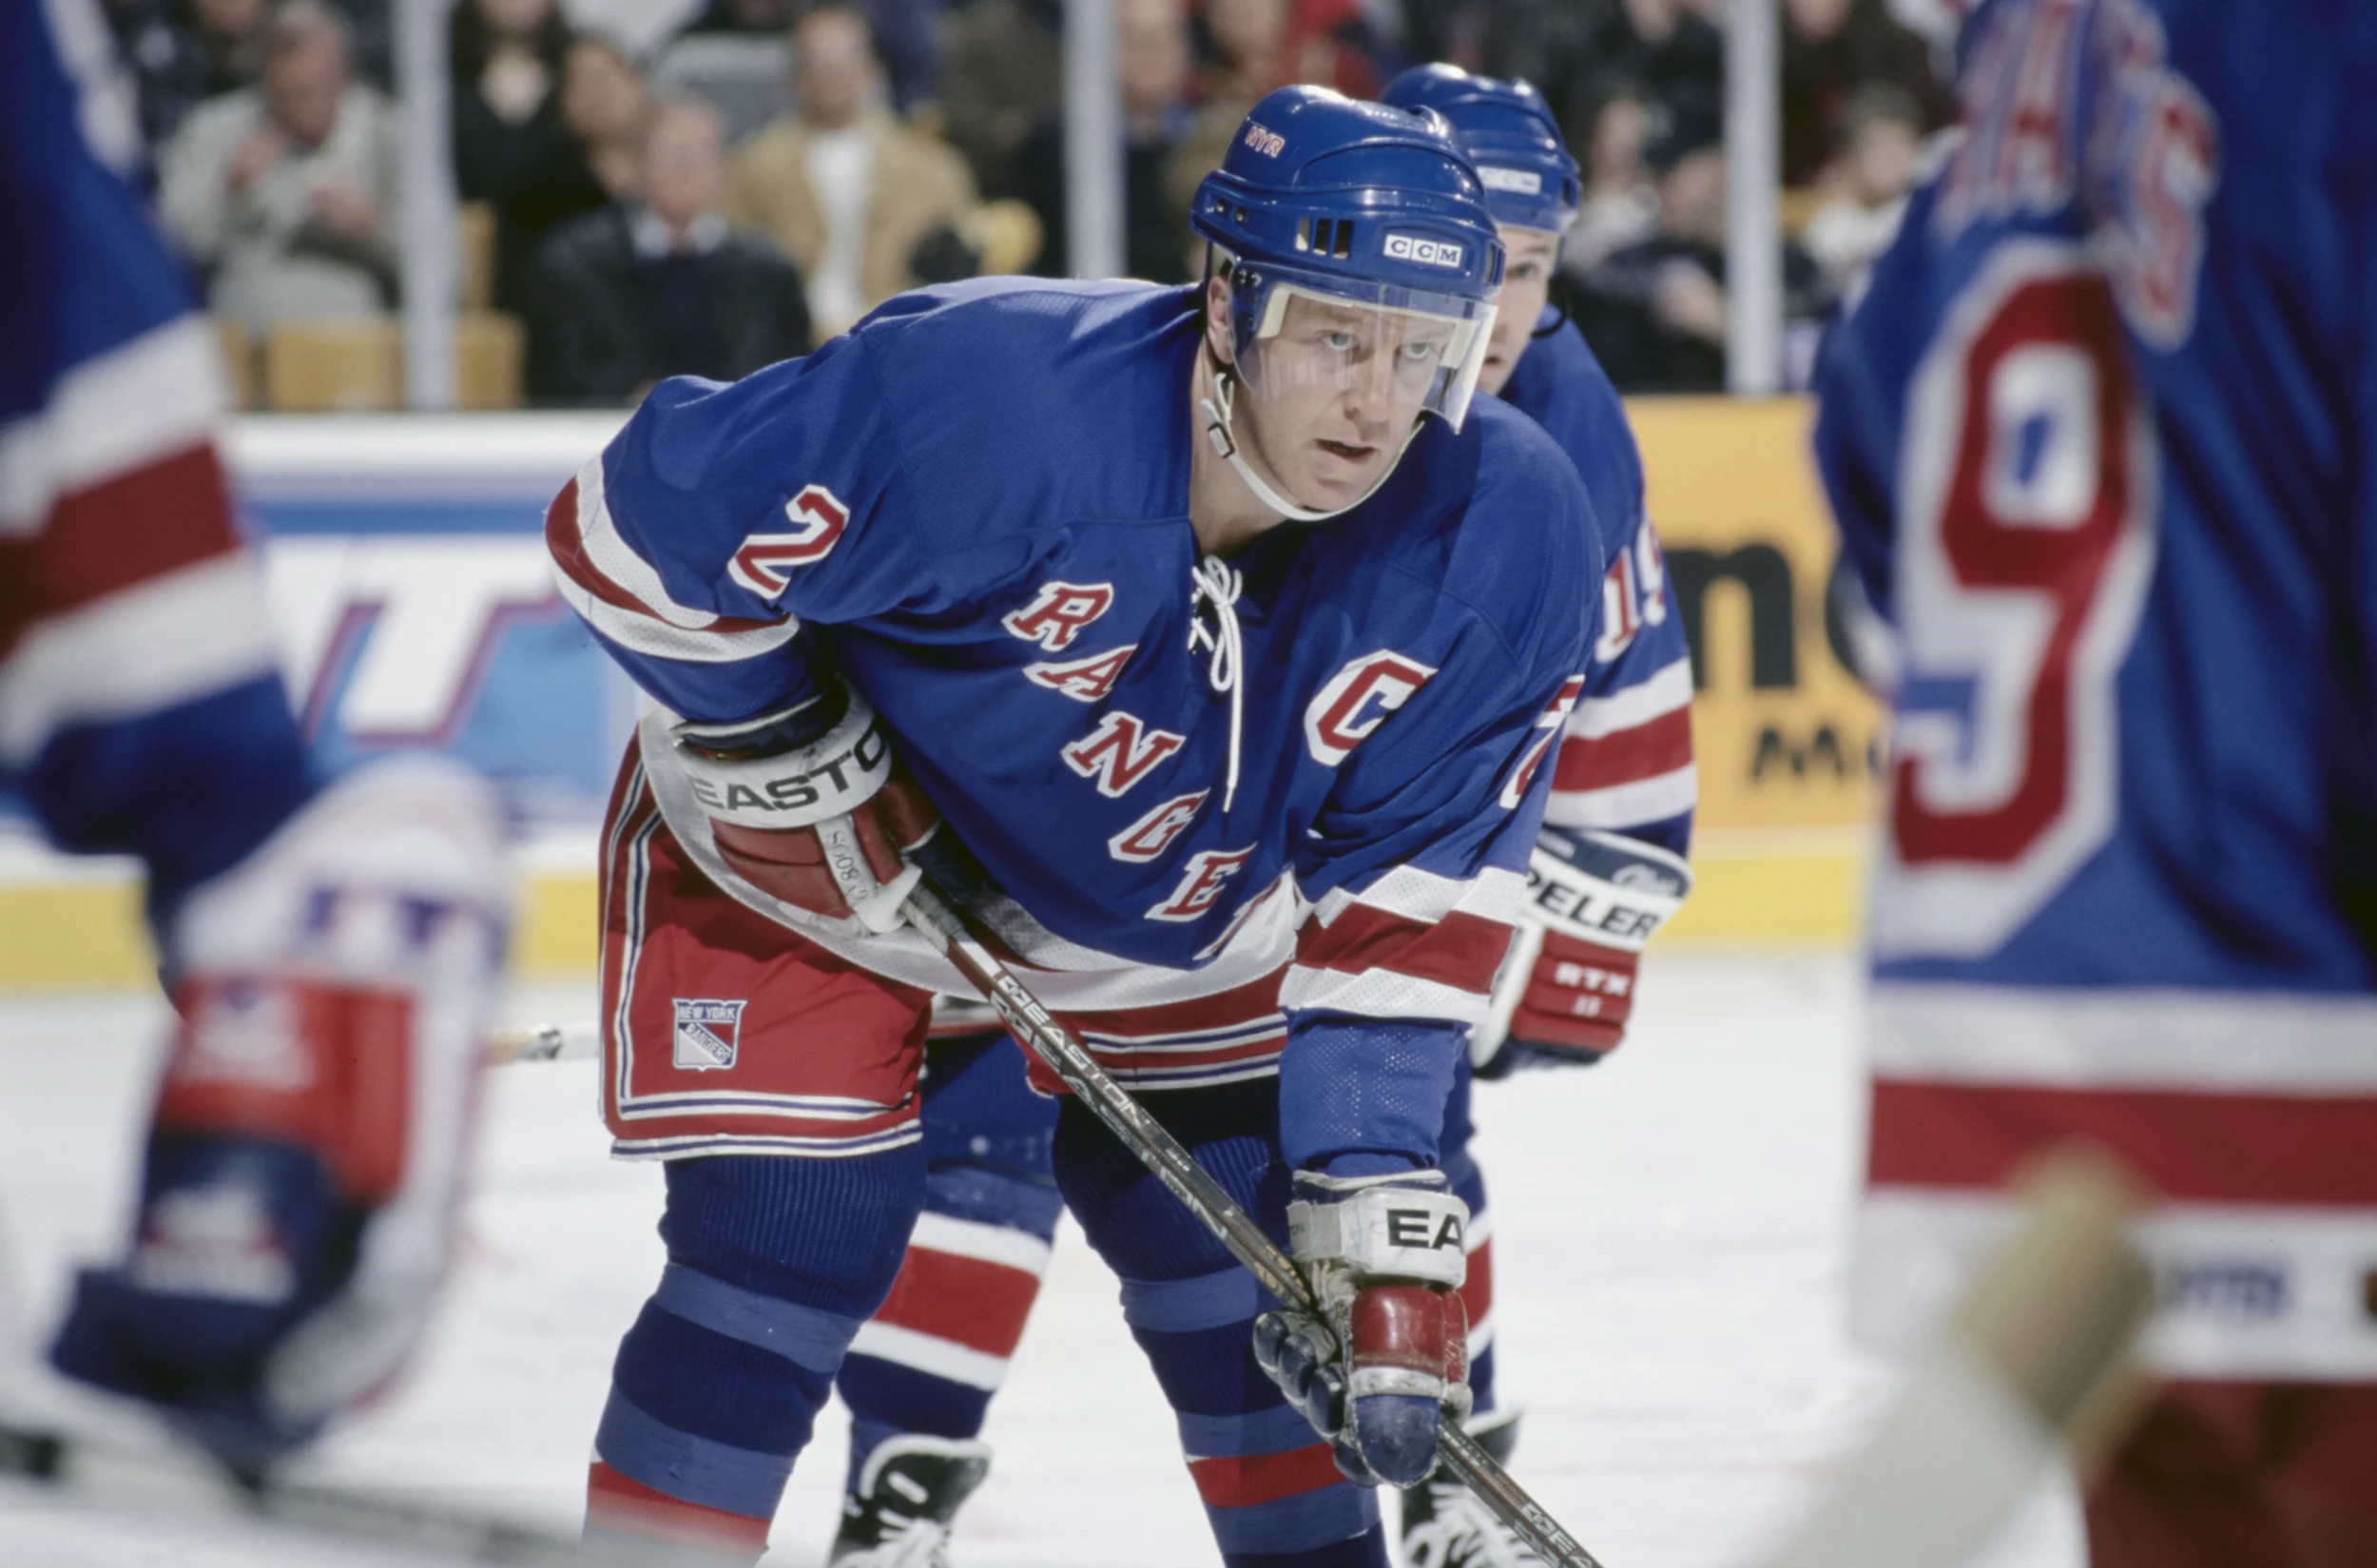 Rangers legend Brian Leetch inducted into IIHF Hall of Fame